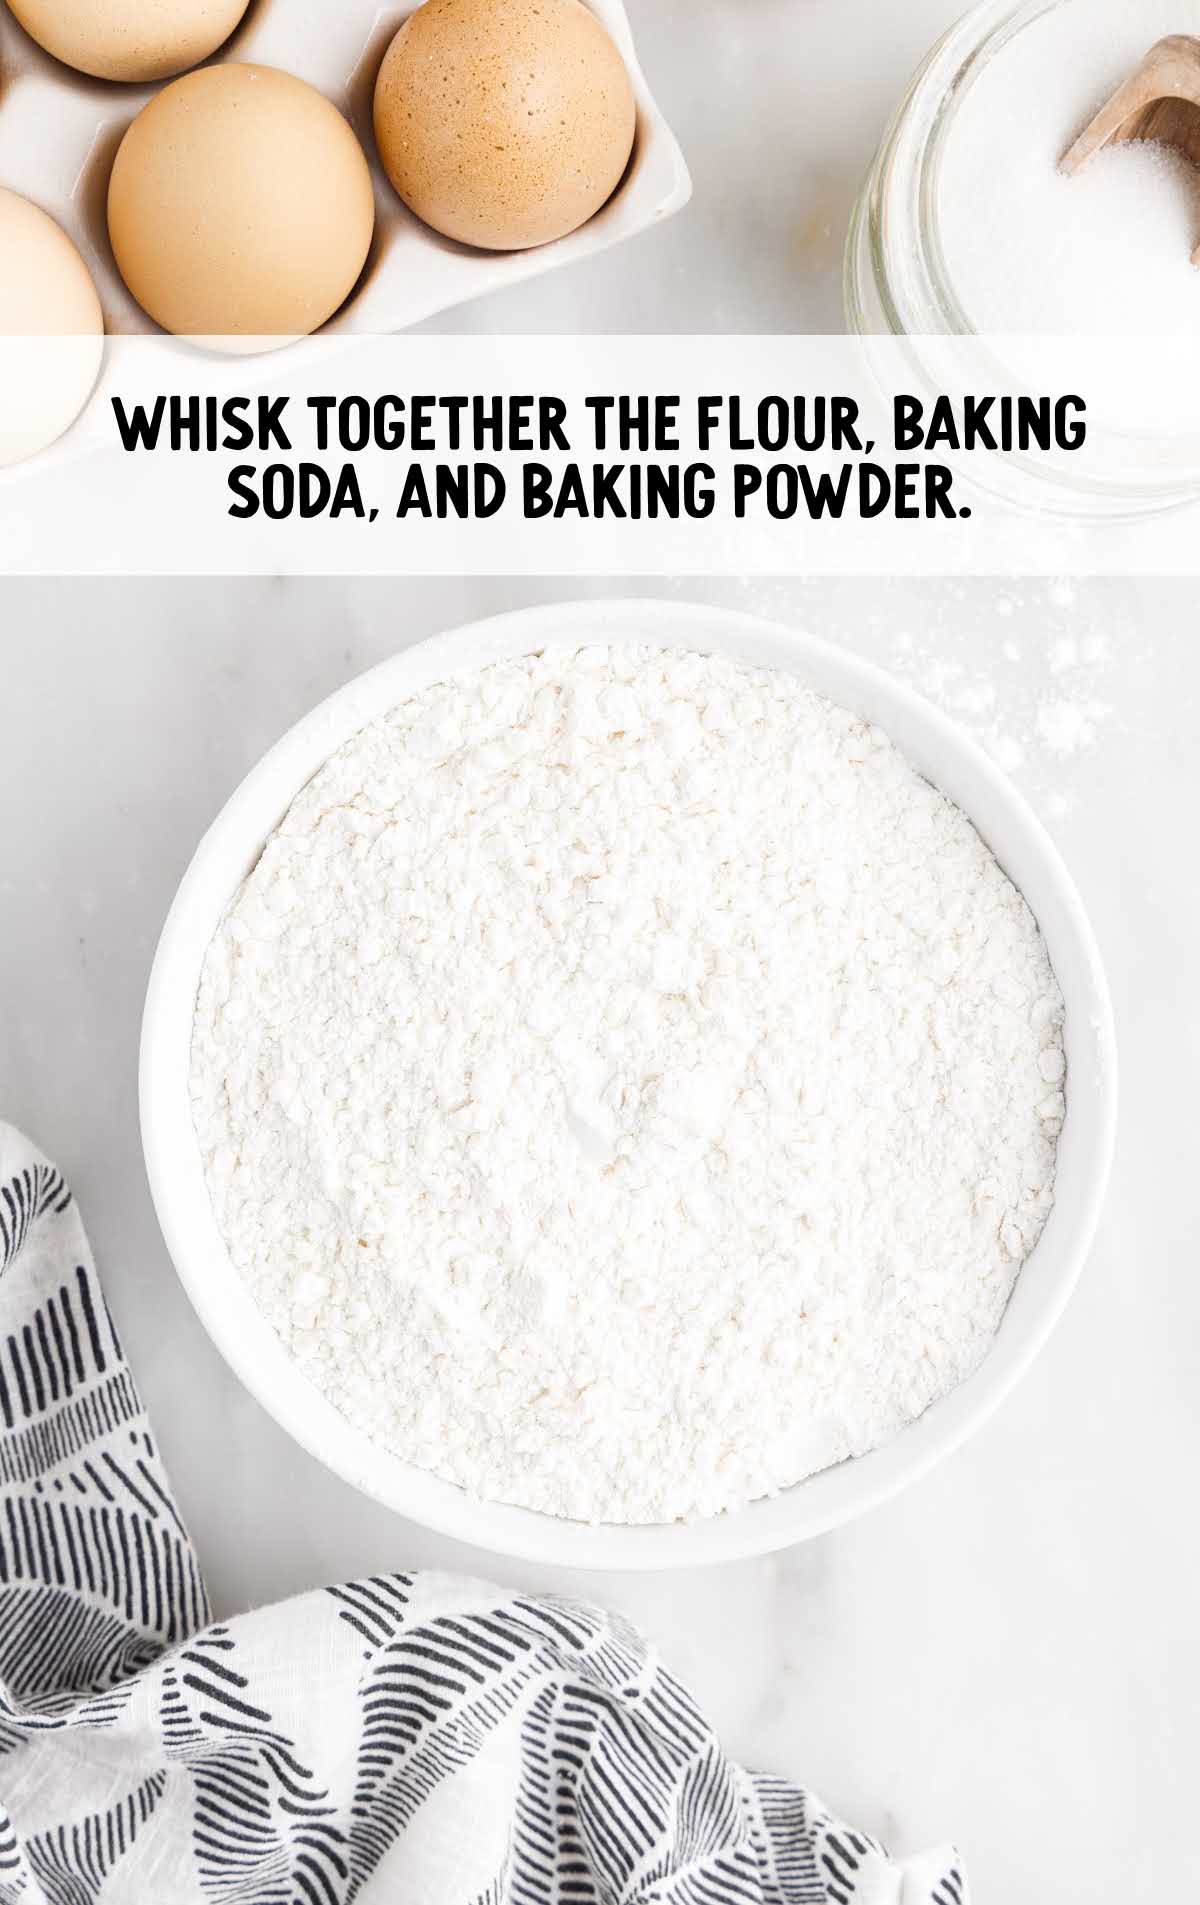 flour, baking soda, and baking powder whisked in a bowl